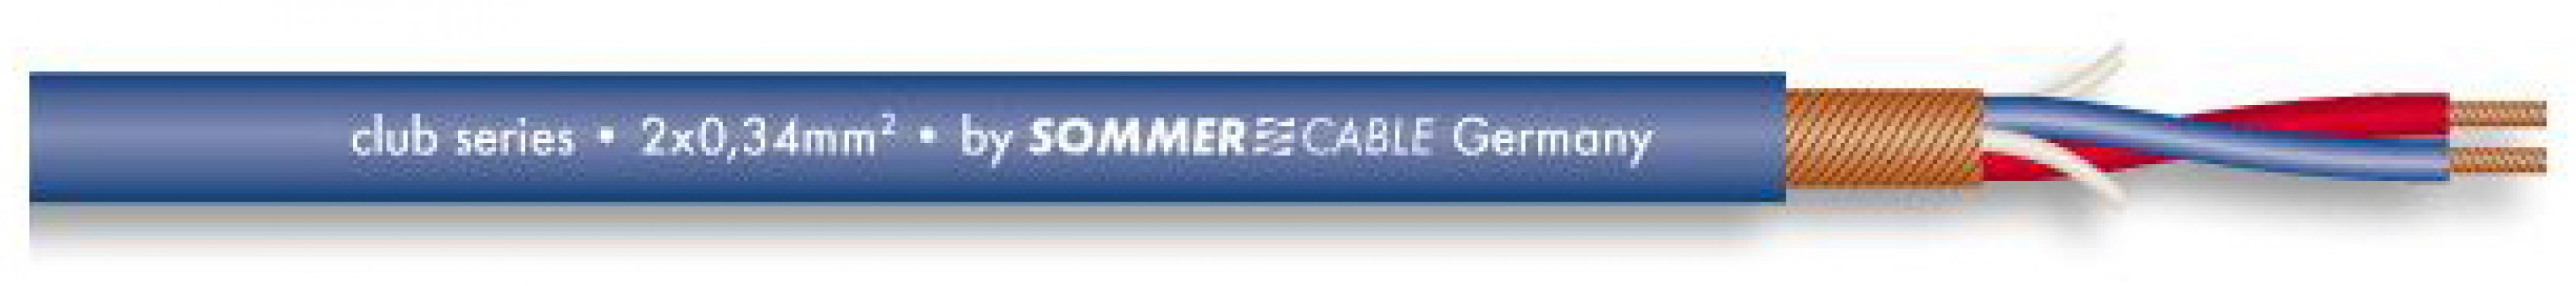 Sommer Cable 200-0052 CLUB SERIES MKII - MODRÝ